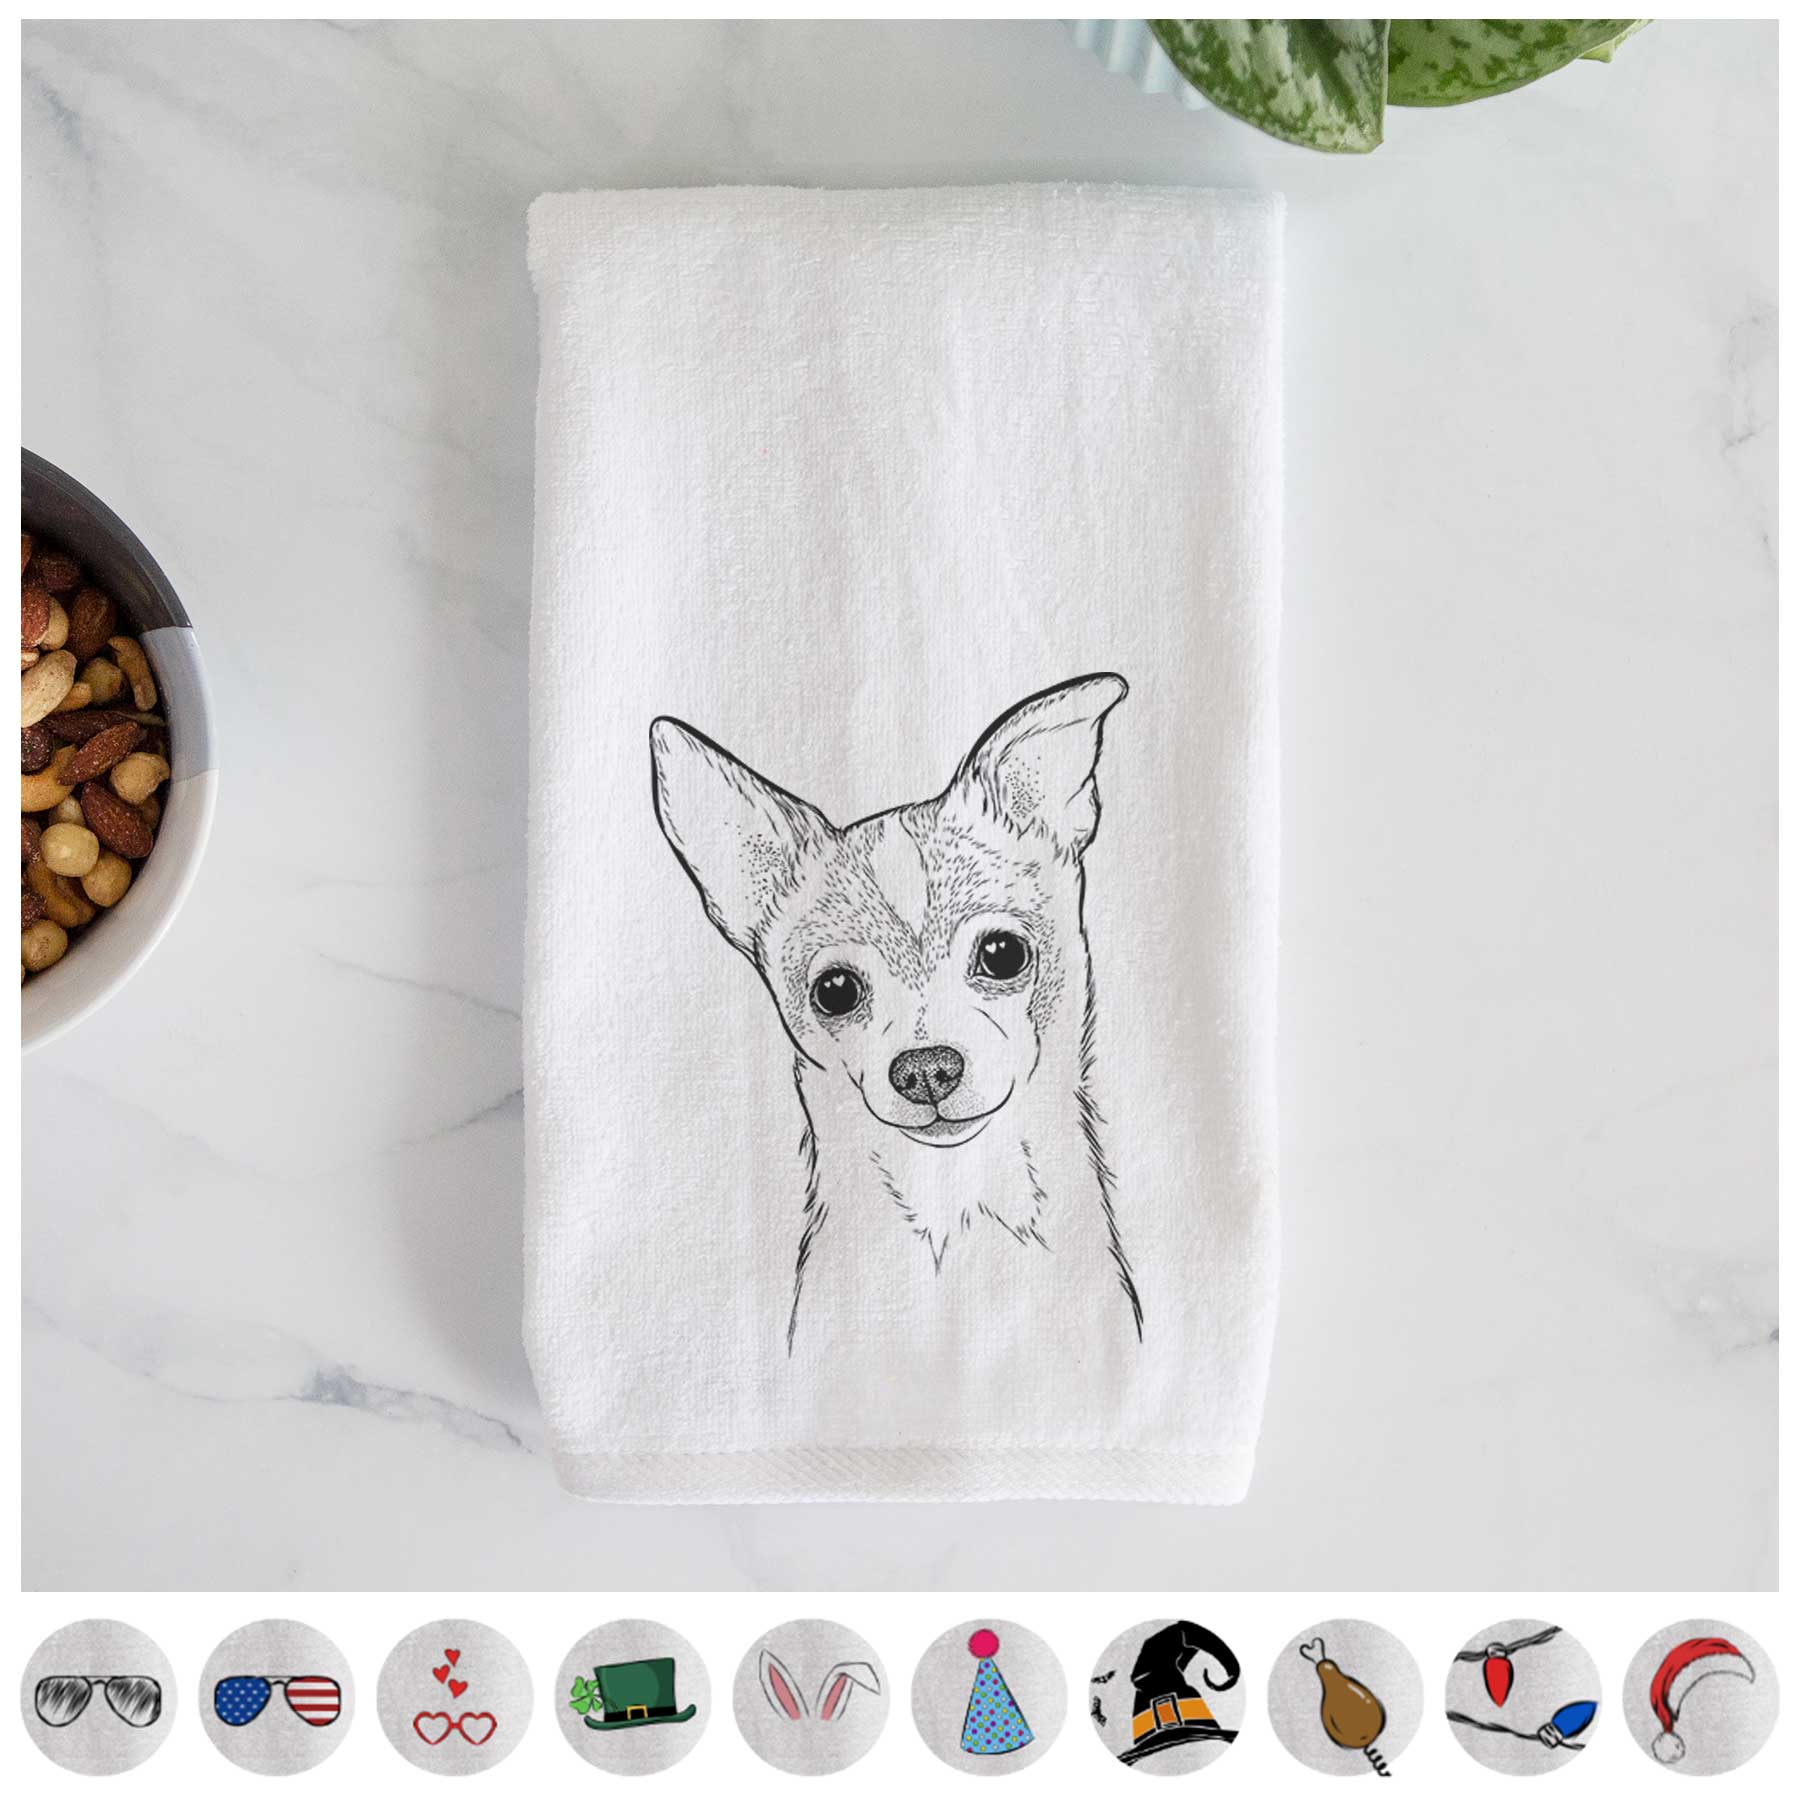 Buggy the Chihuahua Hand Towel